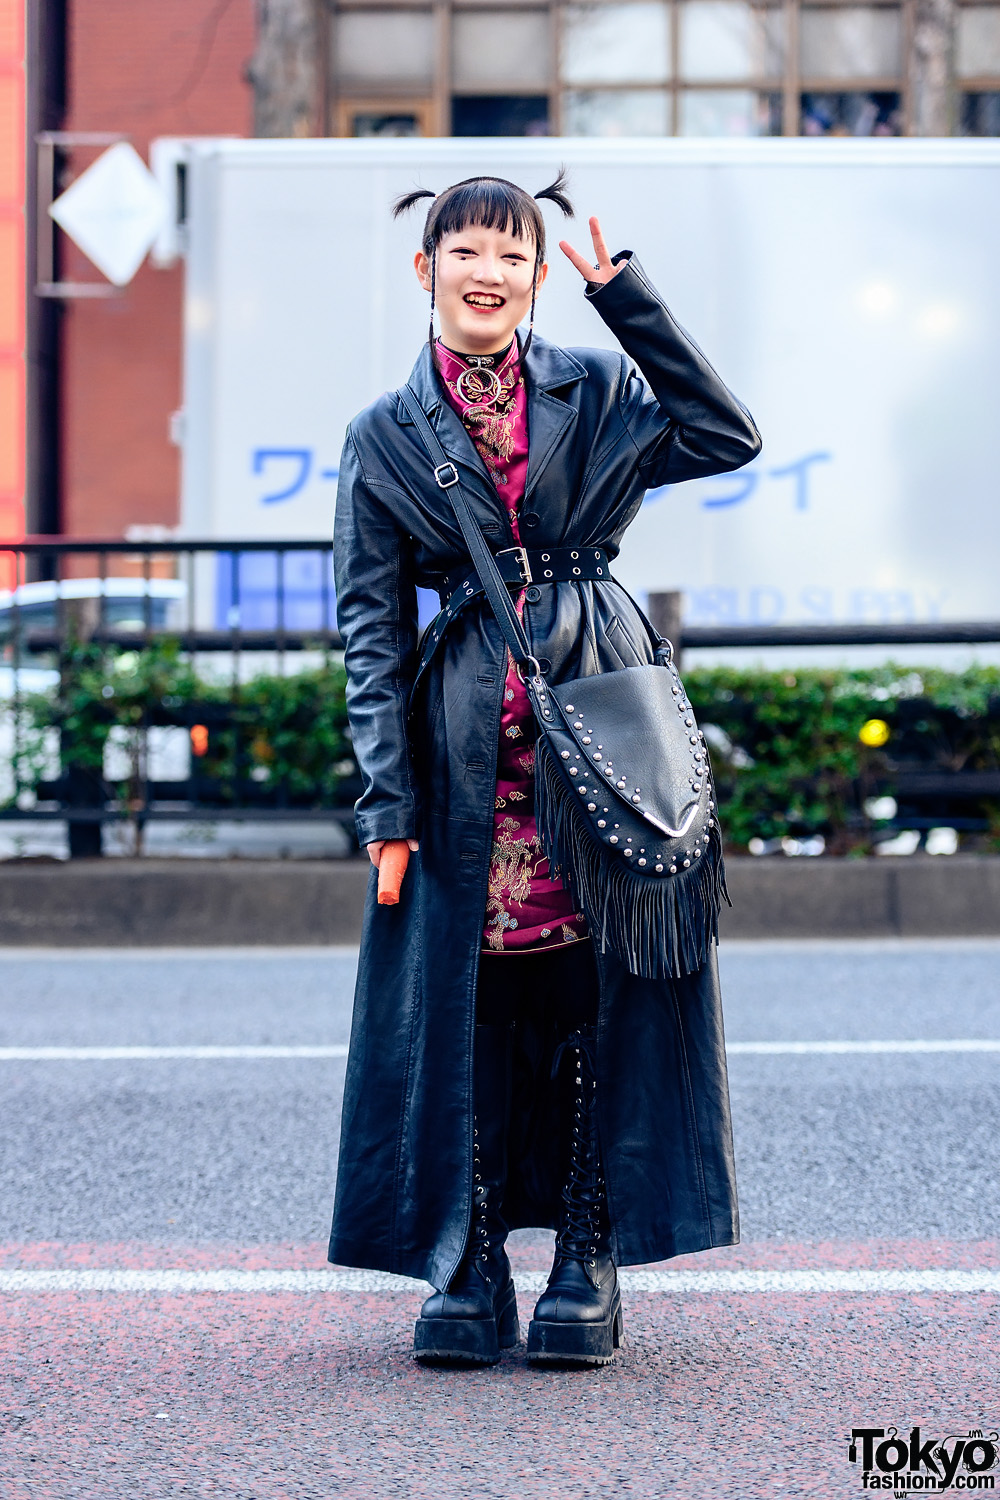 Leather Style in Harajuku w/ Shaved Hairstyle, O-Ring Choker, Leather Trench Coat, Chinese Dragon Dress, Fringe Bag & Demonia Knee Boots